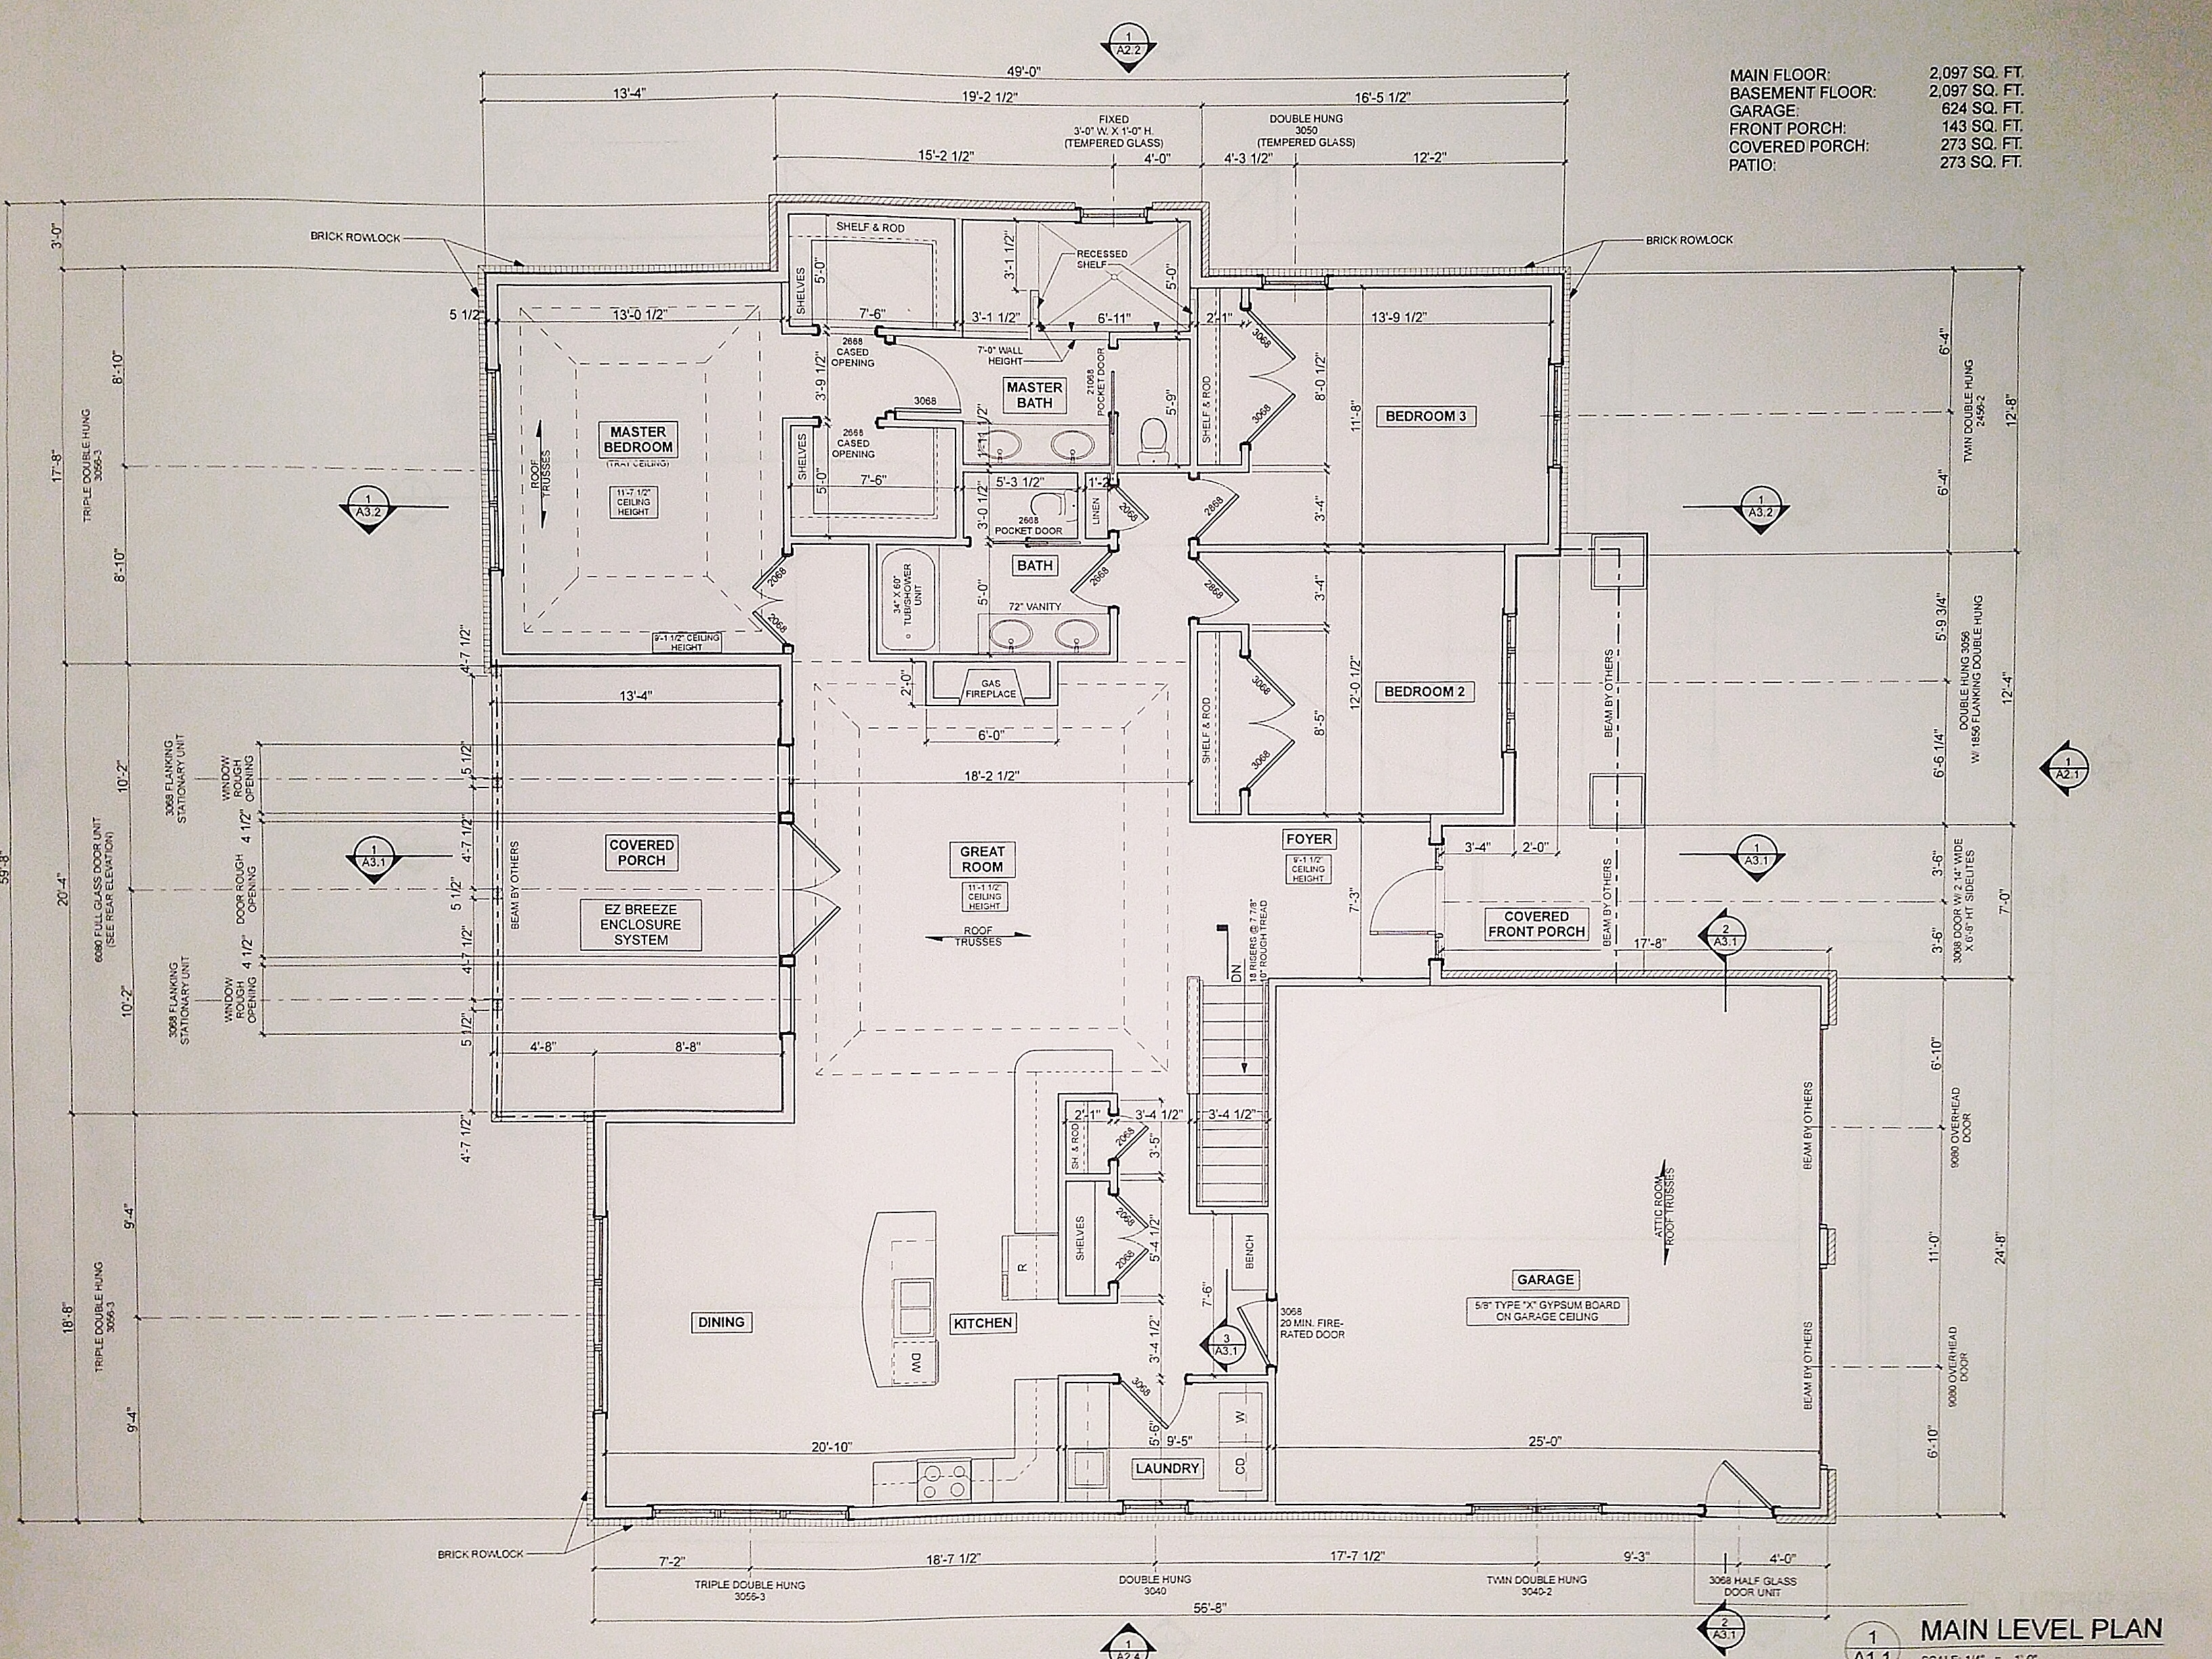 The Plans  Building the Marley  House  Plan  by Don Gardner